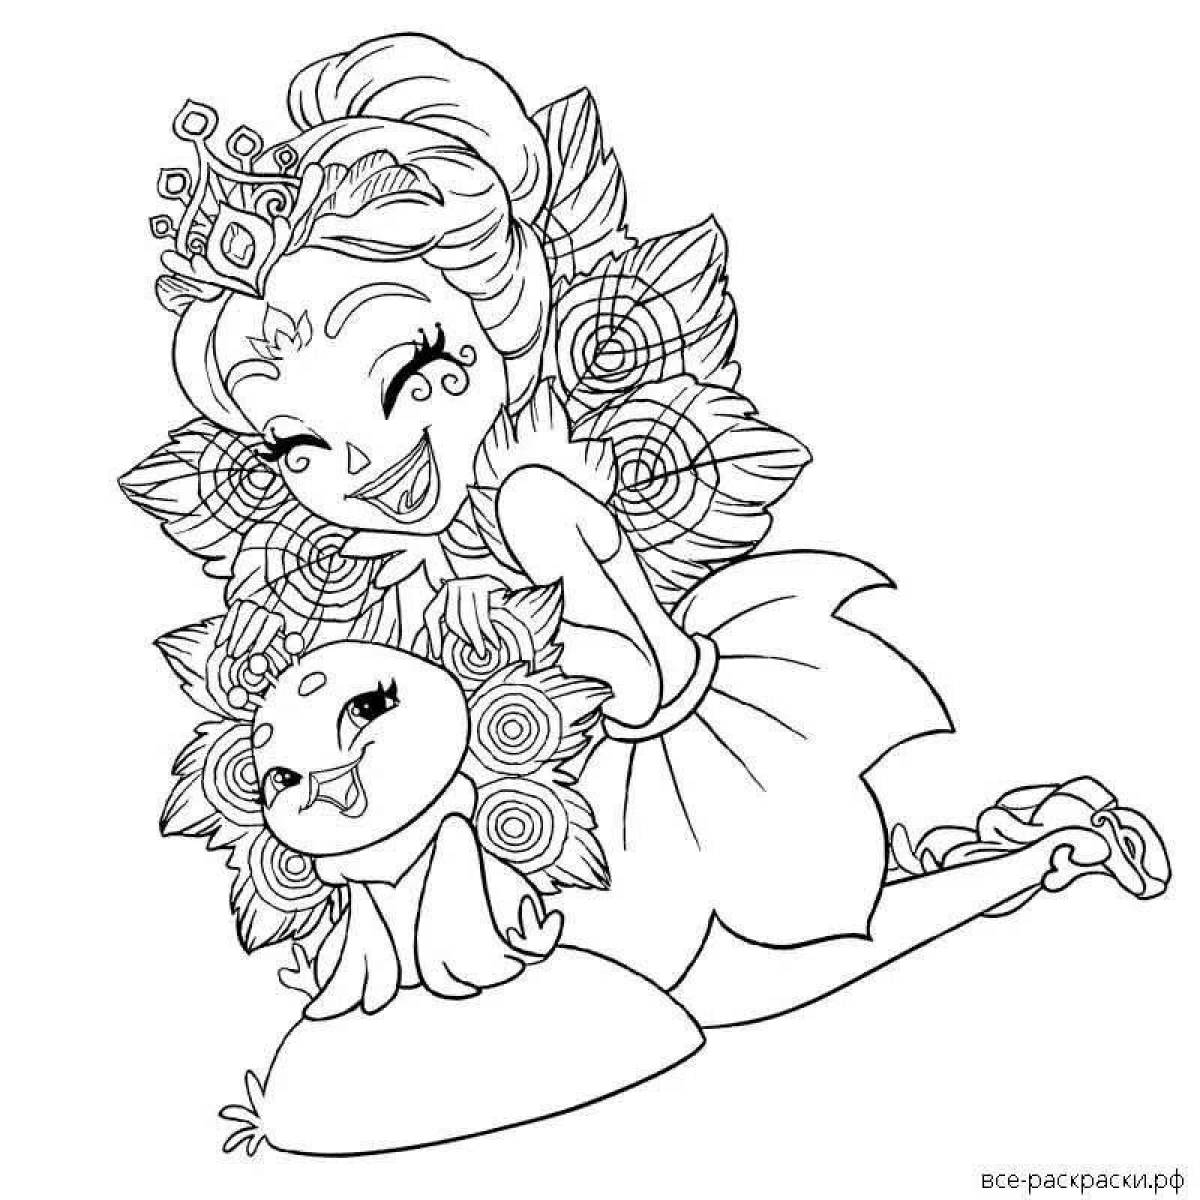 Coloring book fabulous inchanchymuses